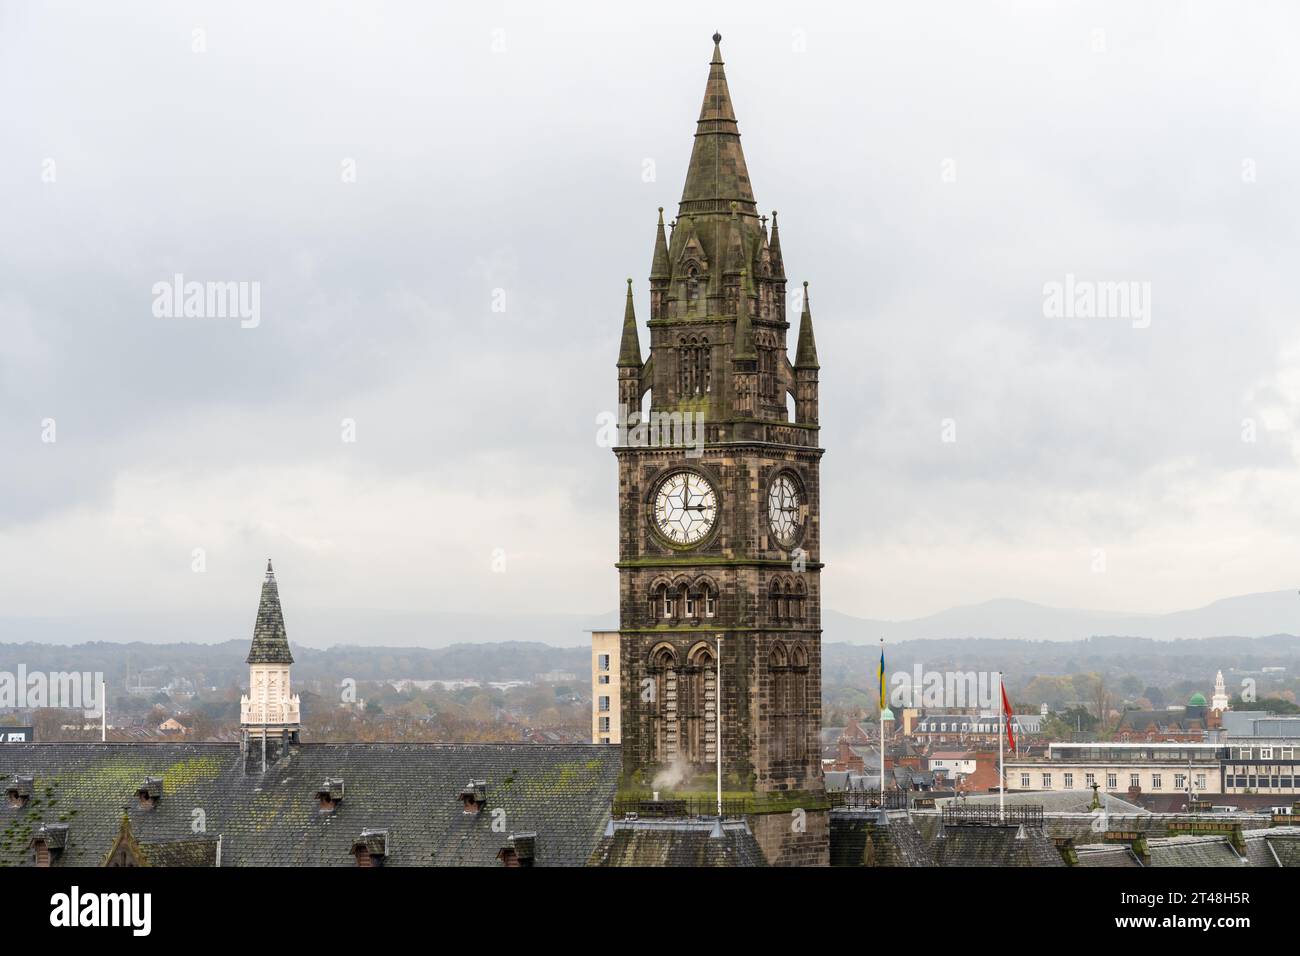 Clock tower of the French Gothic Town Hall, in Middlesbrough, UK, late 19th century. Stock Photo